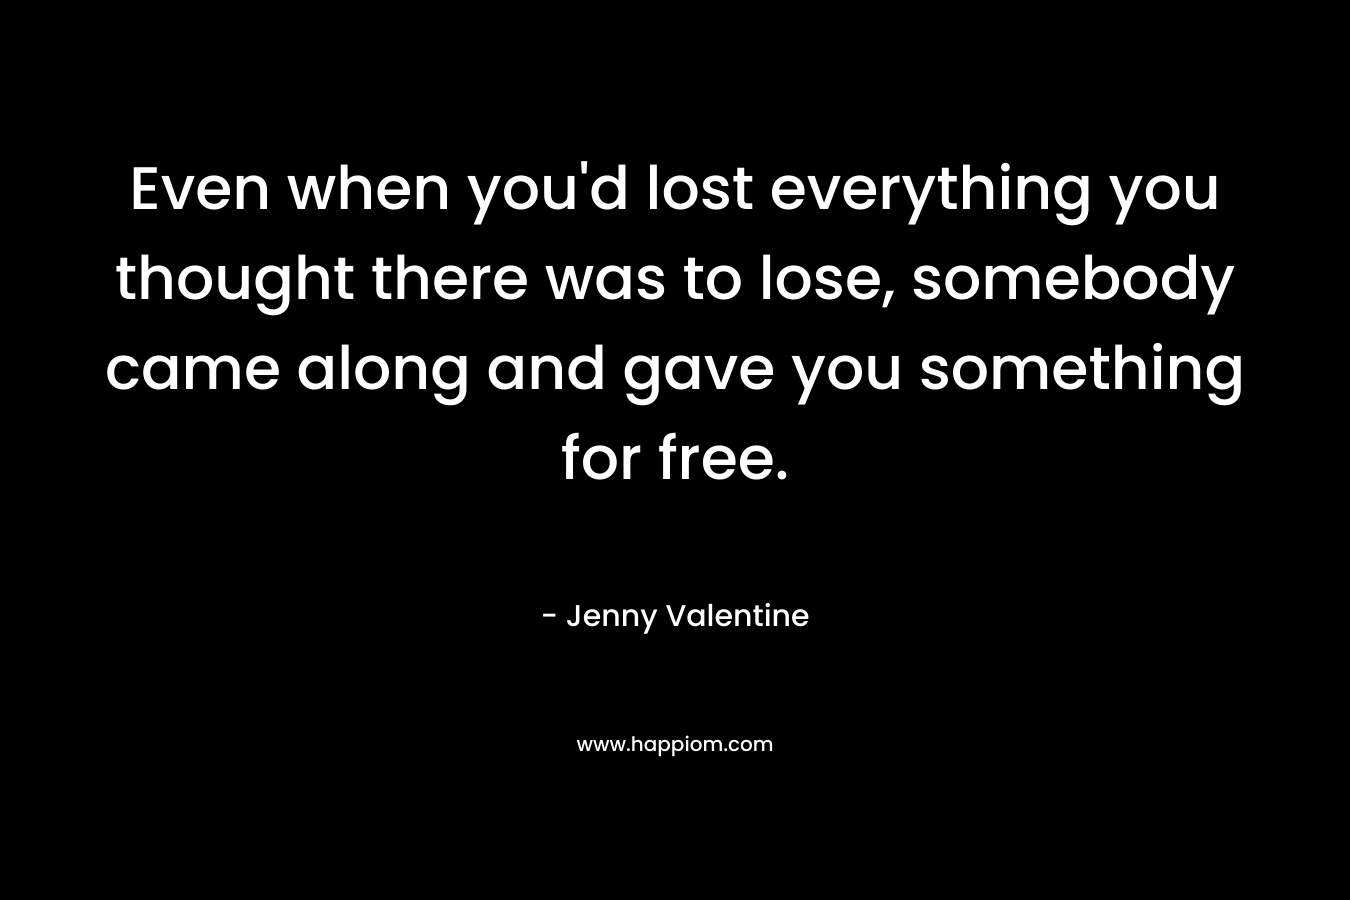 Even when you’d lost everything you thought there was to lose, somebody came along and gave you something for free. – Jenny Valentine